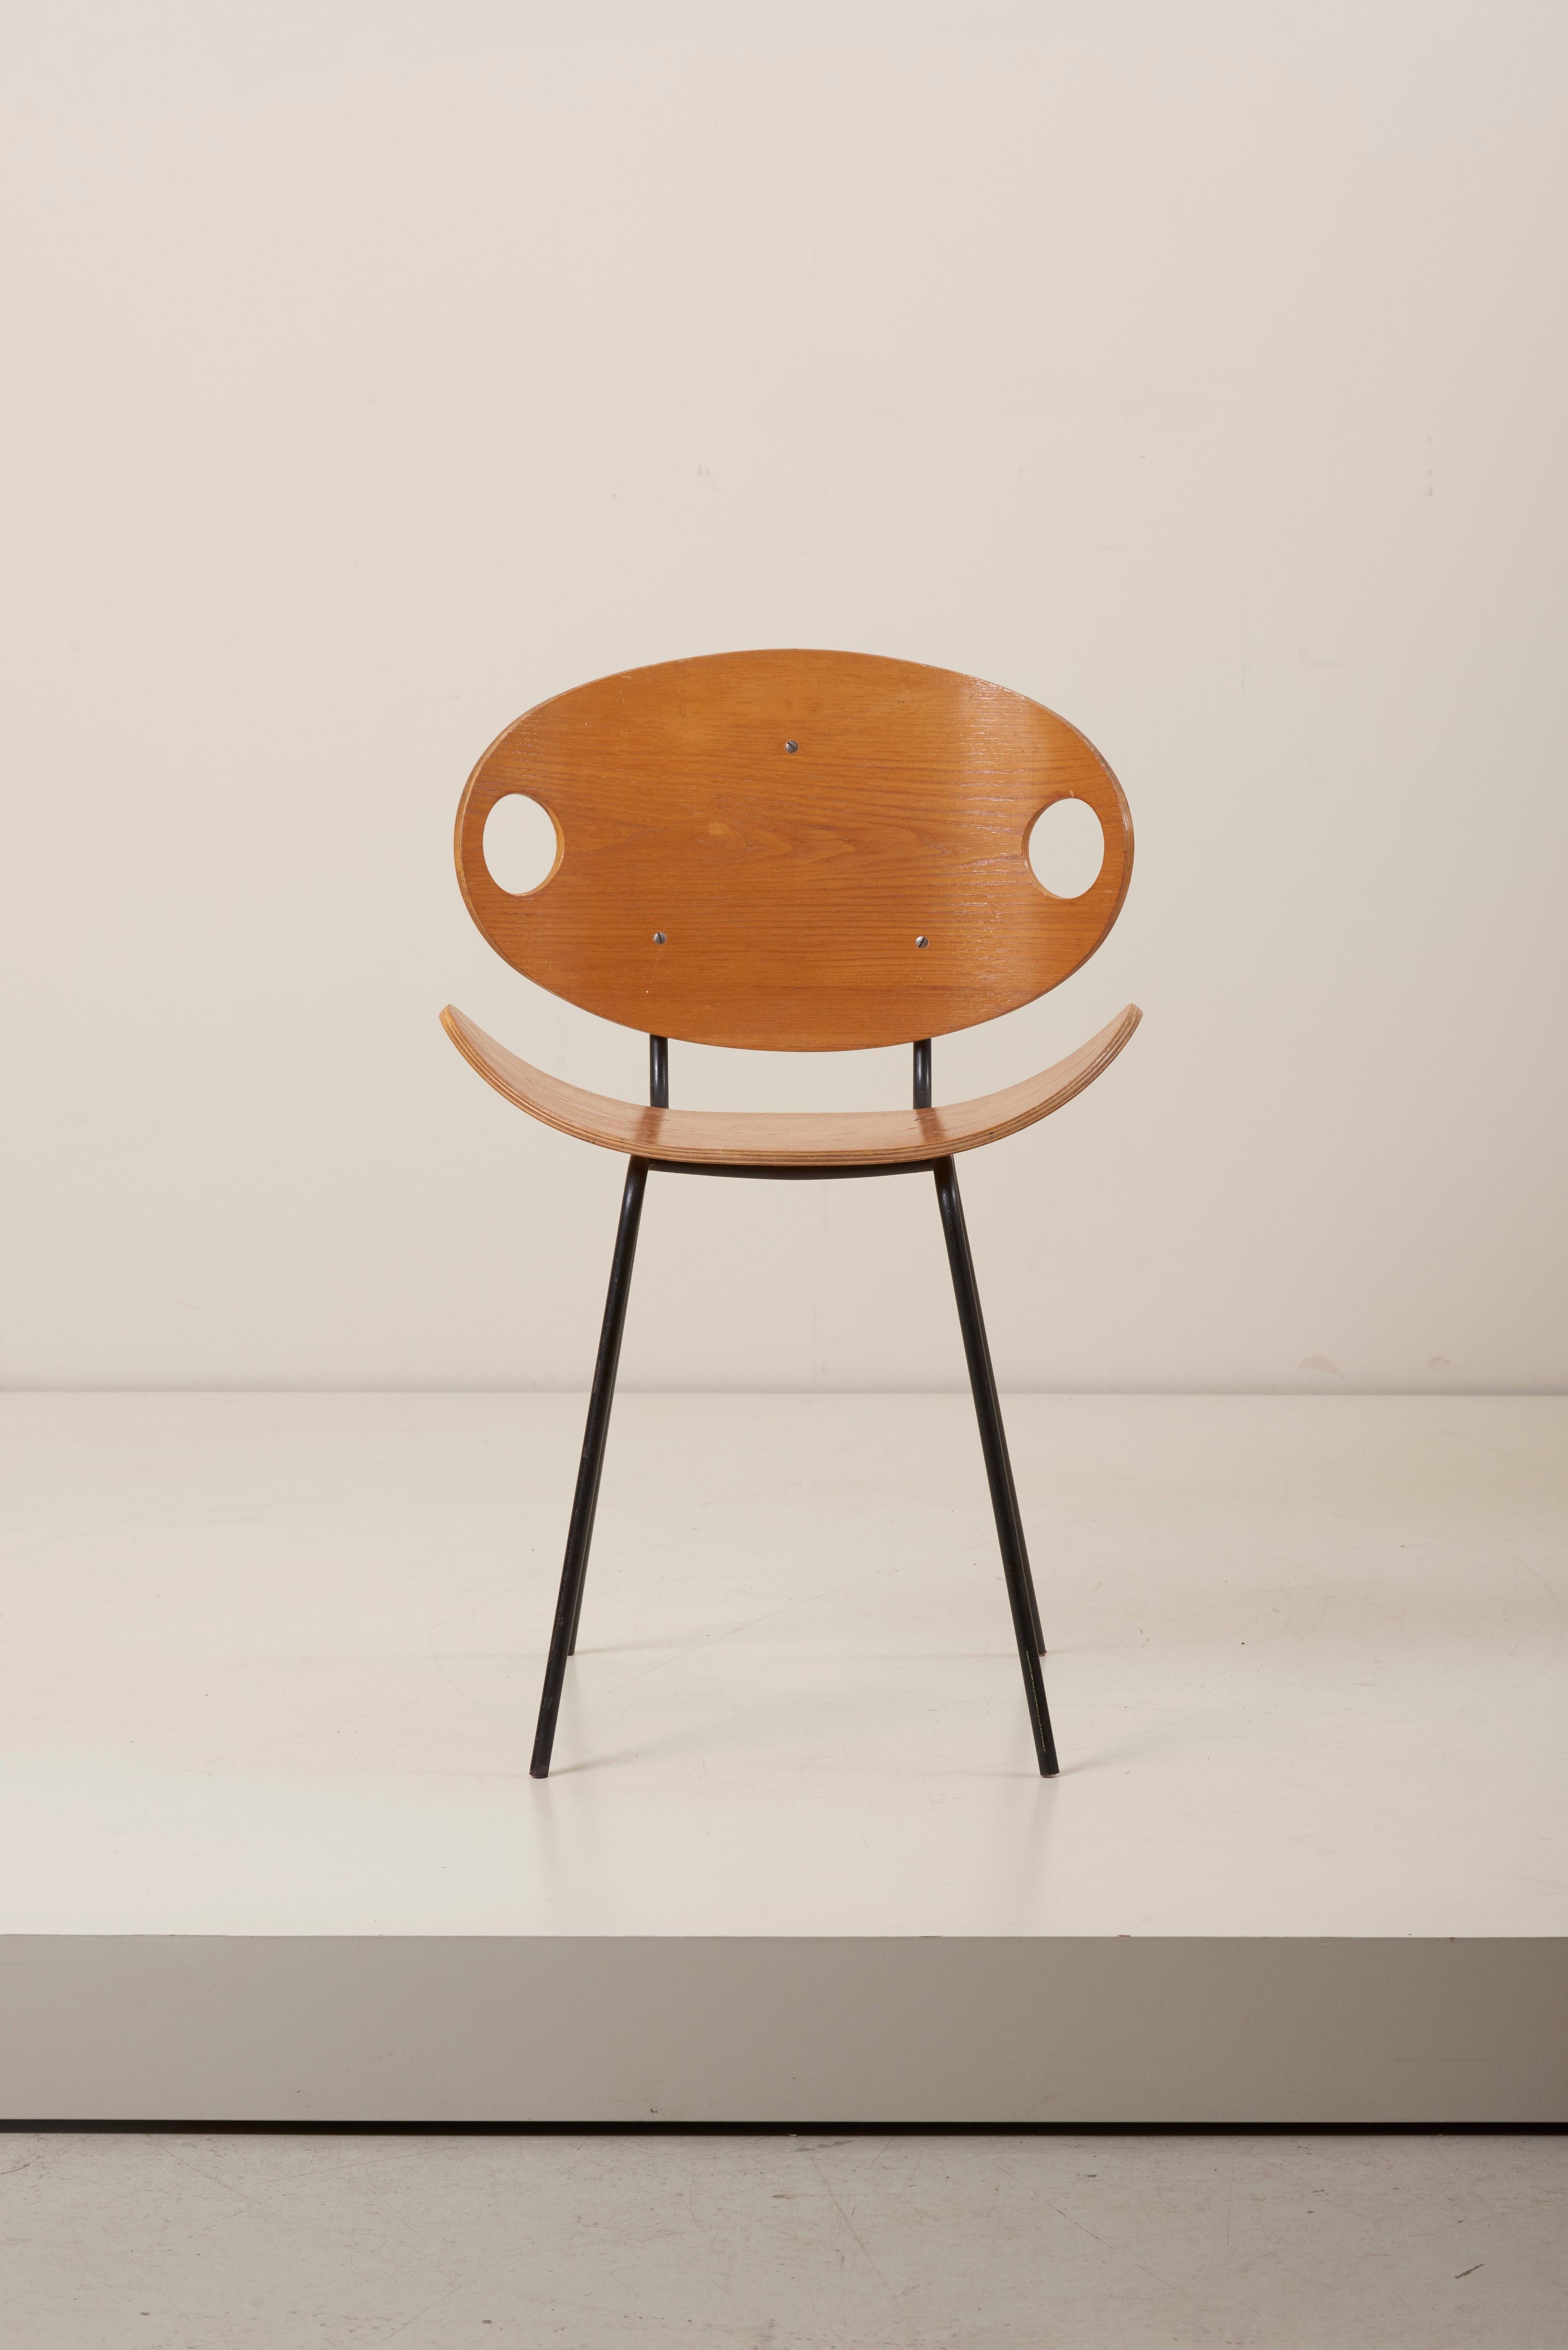 The chairs are made of four black metal legs and an ash-tree plywood seat which curves upwards. A simple and elegant design, labelled by J. Merivaara. Authentic patina.